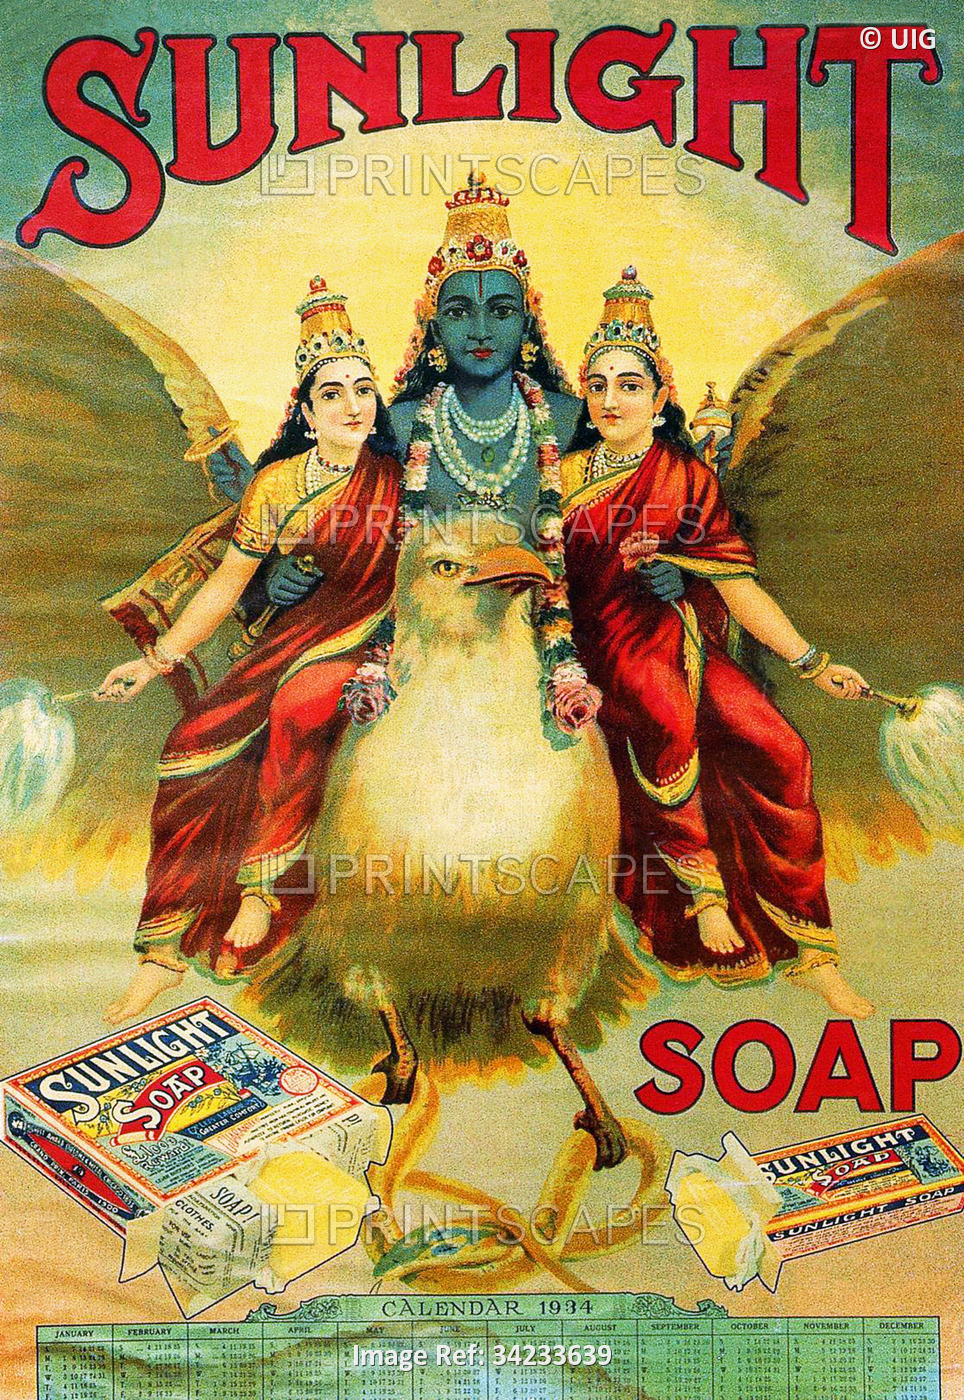 India: Advertising poster for Sunlight Soap featuring Vishnu and companions. 1930